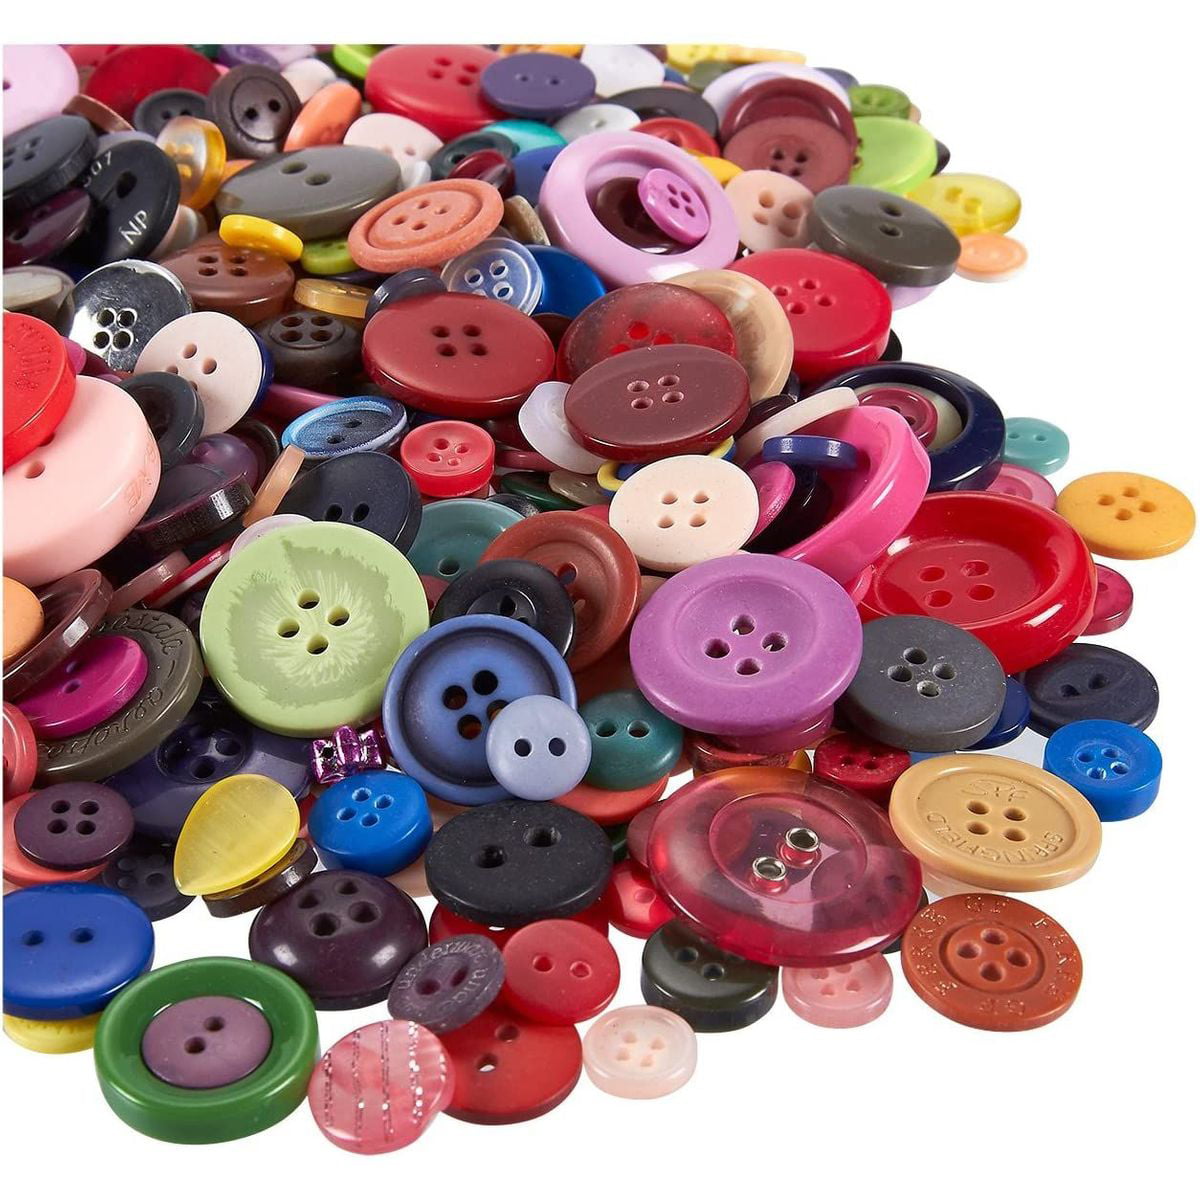 100pcs Assorted Round Resin Buttons Craft-Scrapbook-Embellishment-Sew Cards